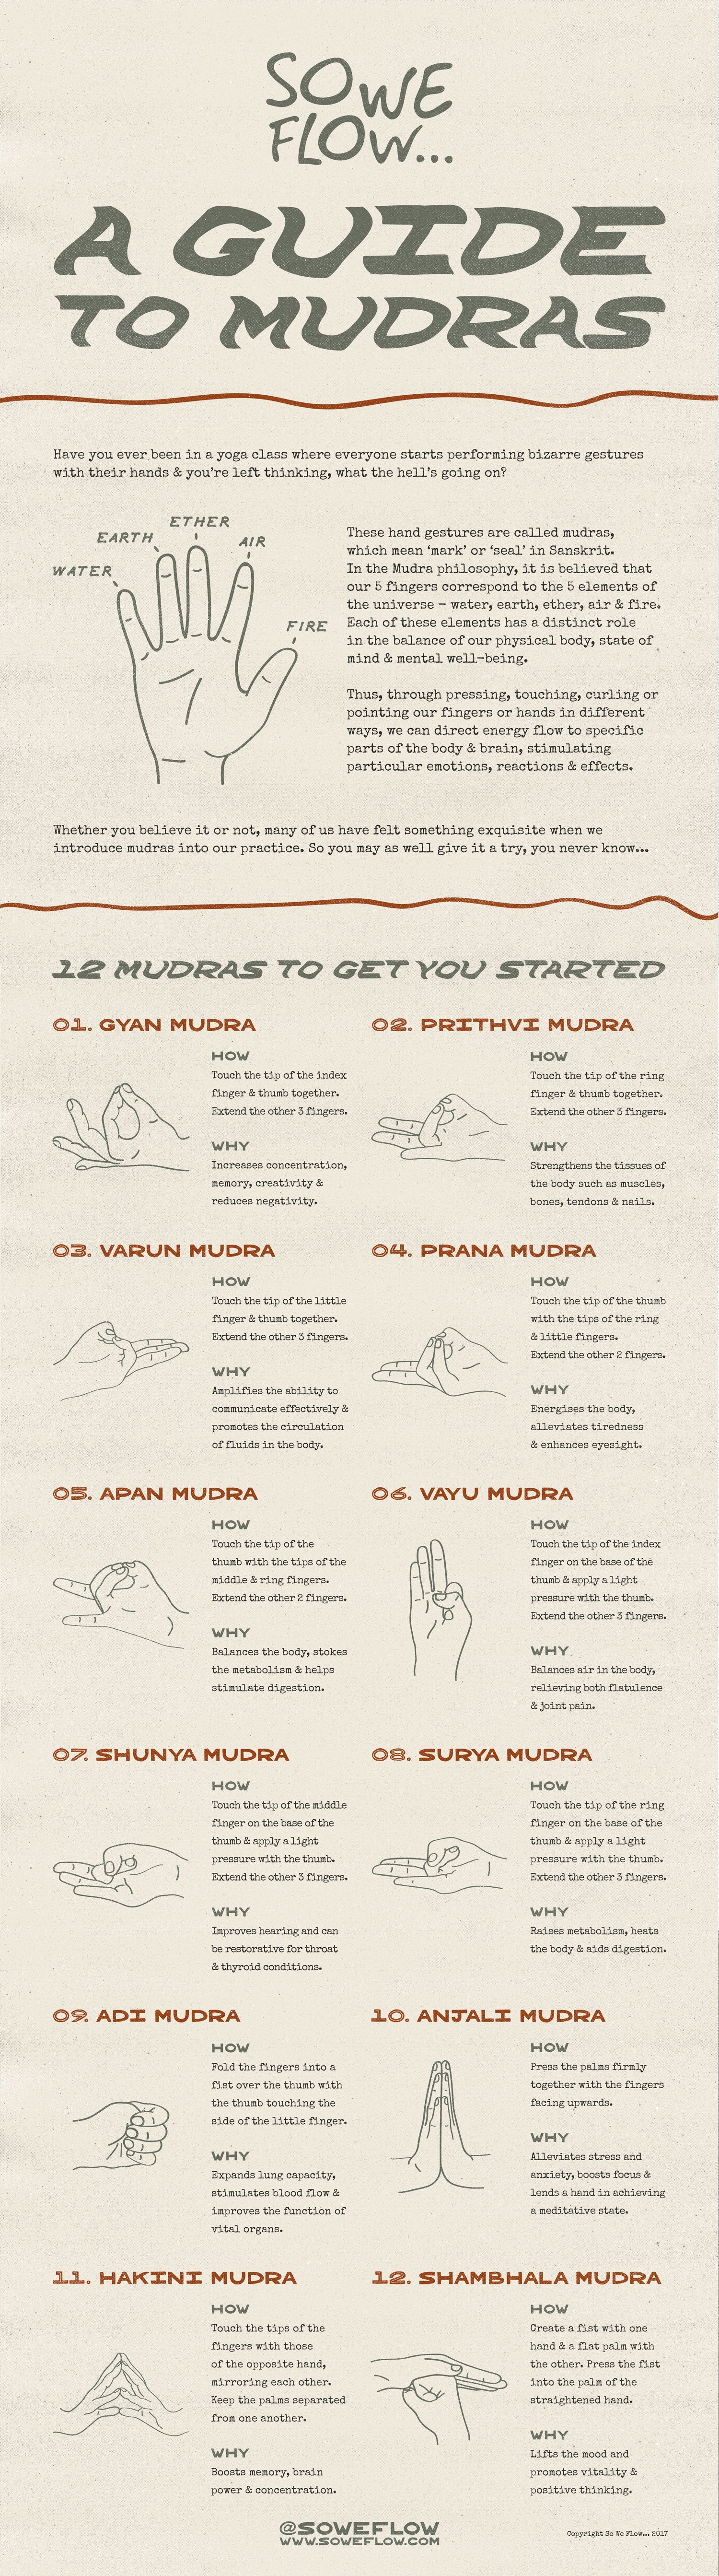 So We Flow... A Guide To Mudras Infographic